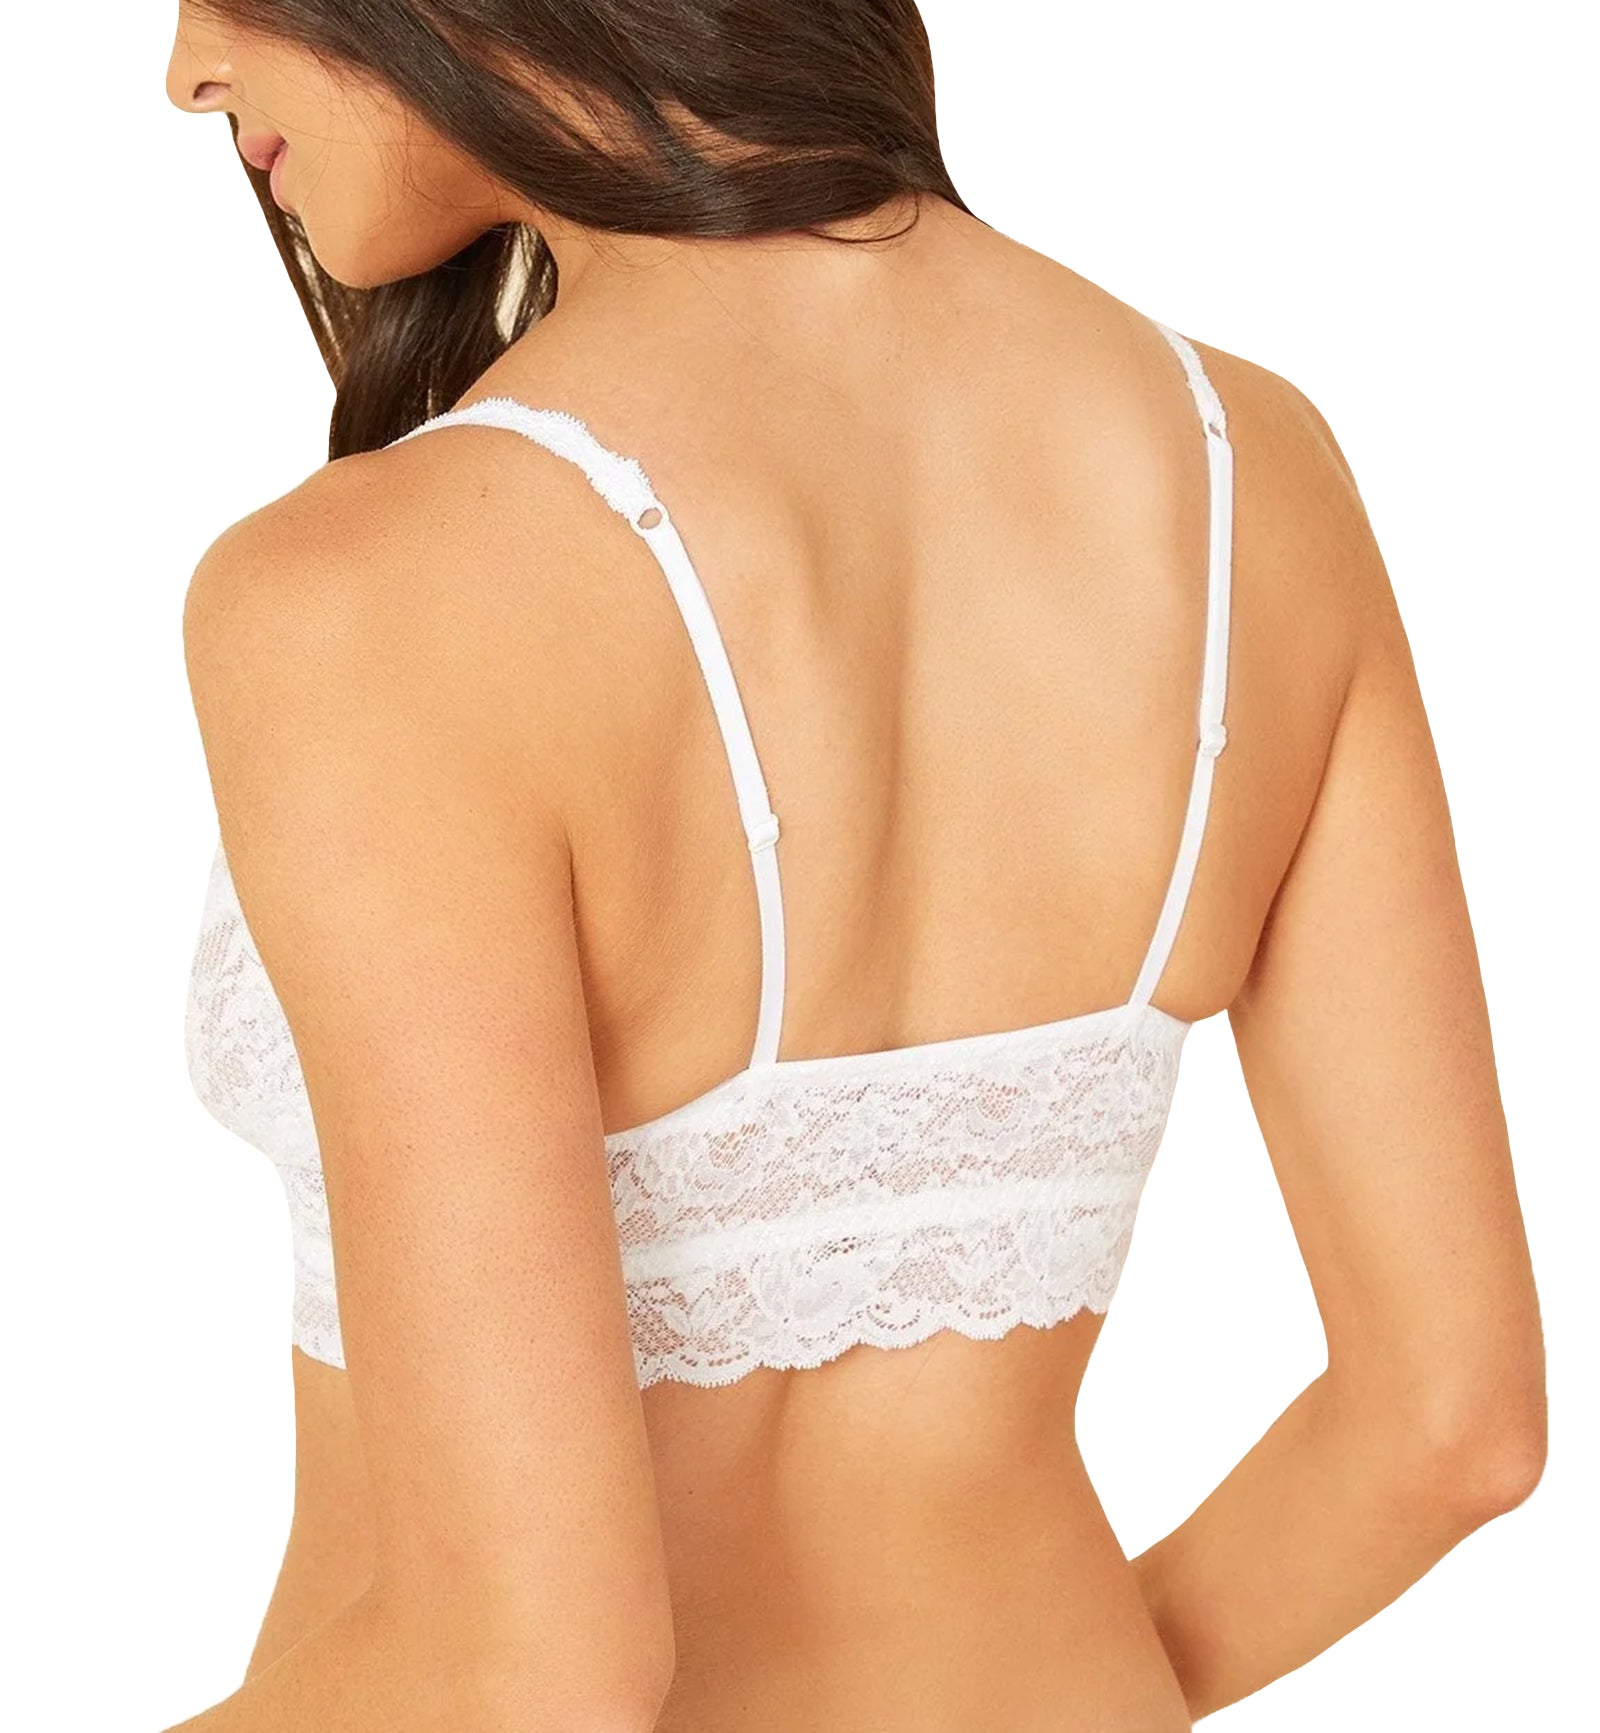 Cosabella Never Say Never Sweetie Soft Bra (NEVER1301),Small,White - White,Small